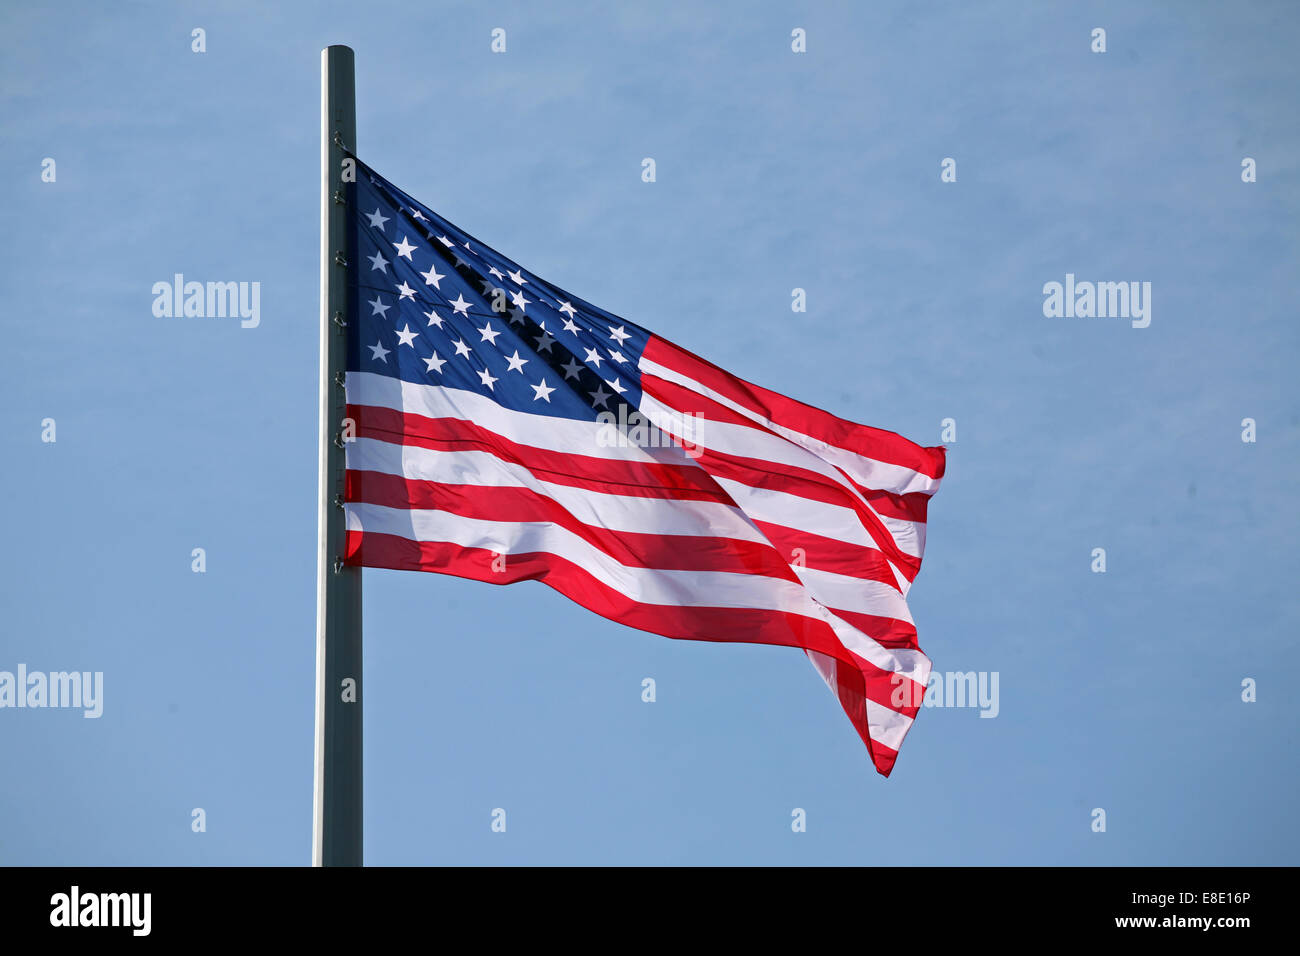 The American flag, The Stars and Stripes; Red, White and Blue; Old Glory; The Star-Spangled Banner Stock Photo